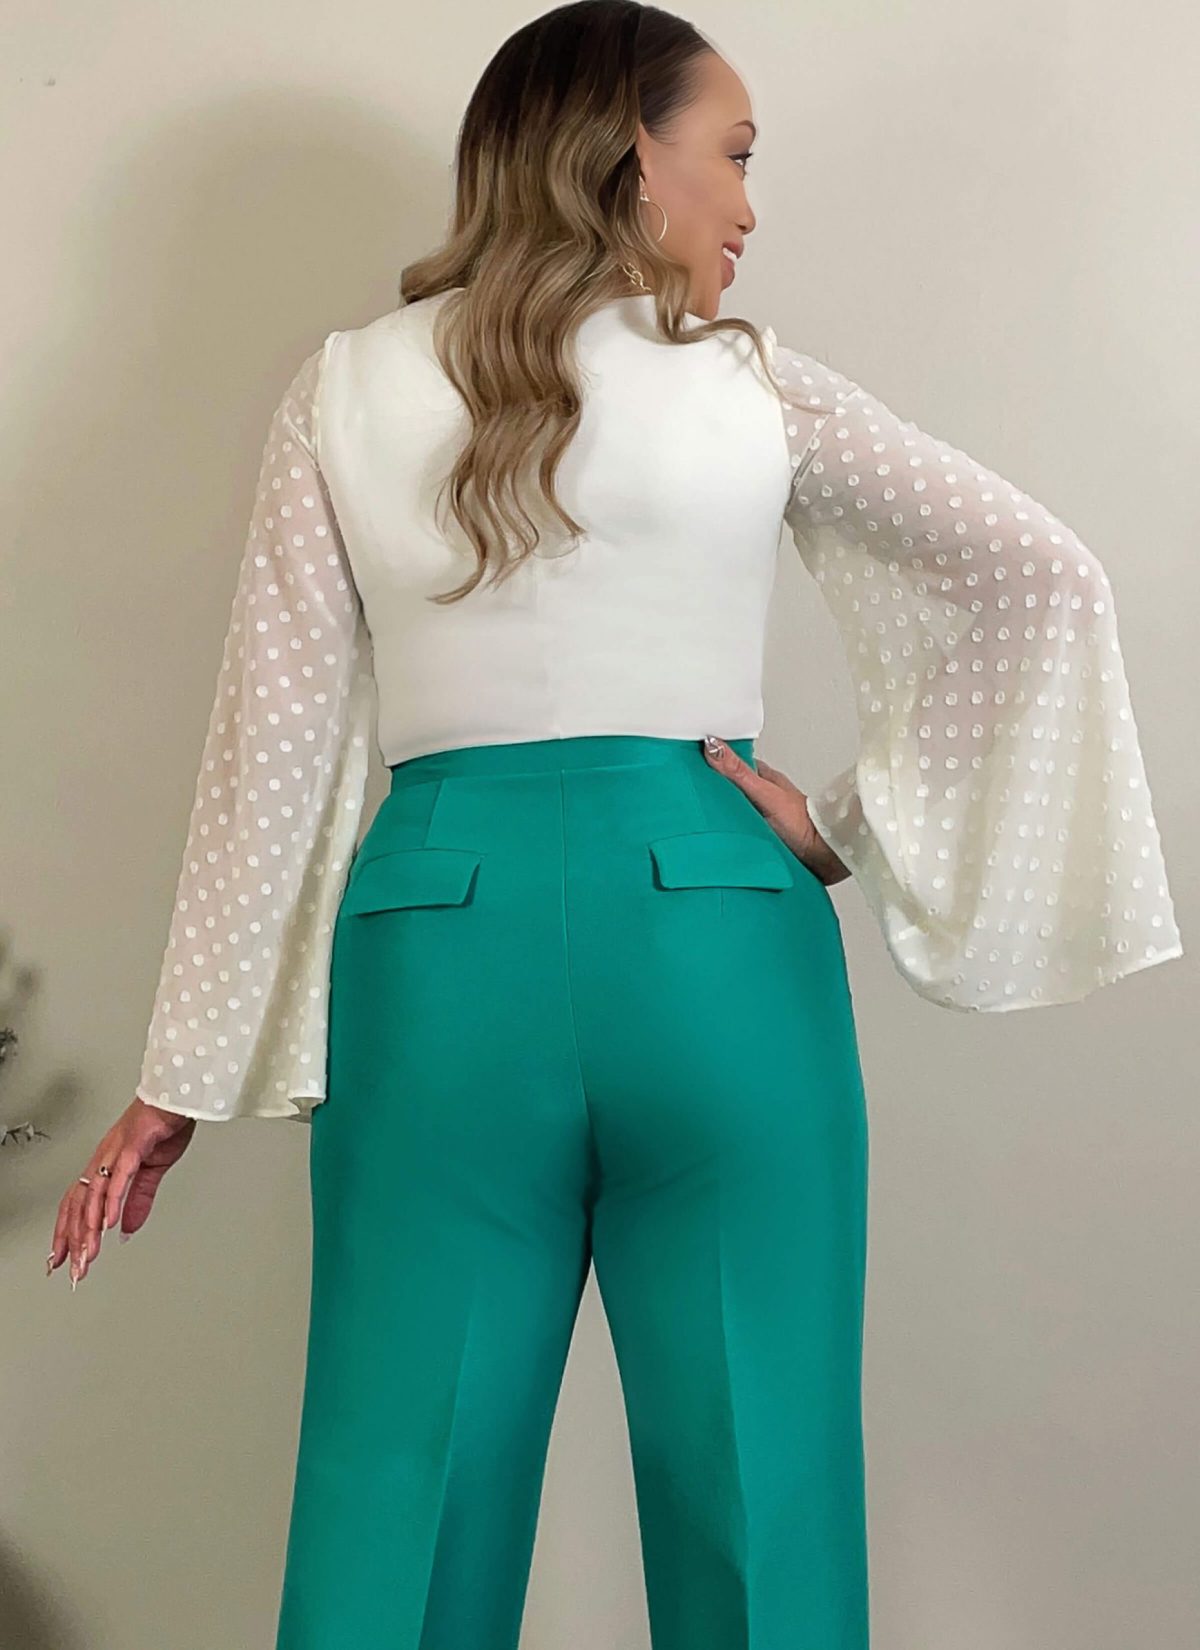 Know Me Sewing Pattern ME2043 Misses’ Bodysuits and Trousers